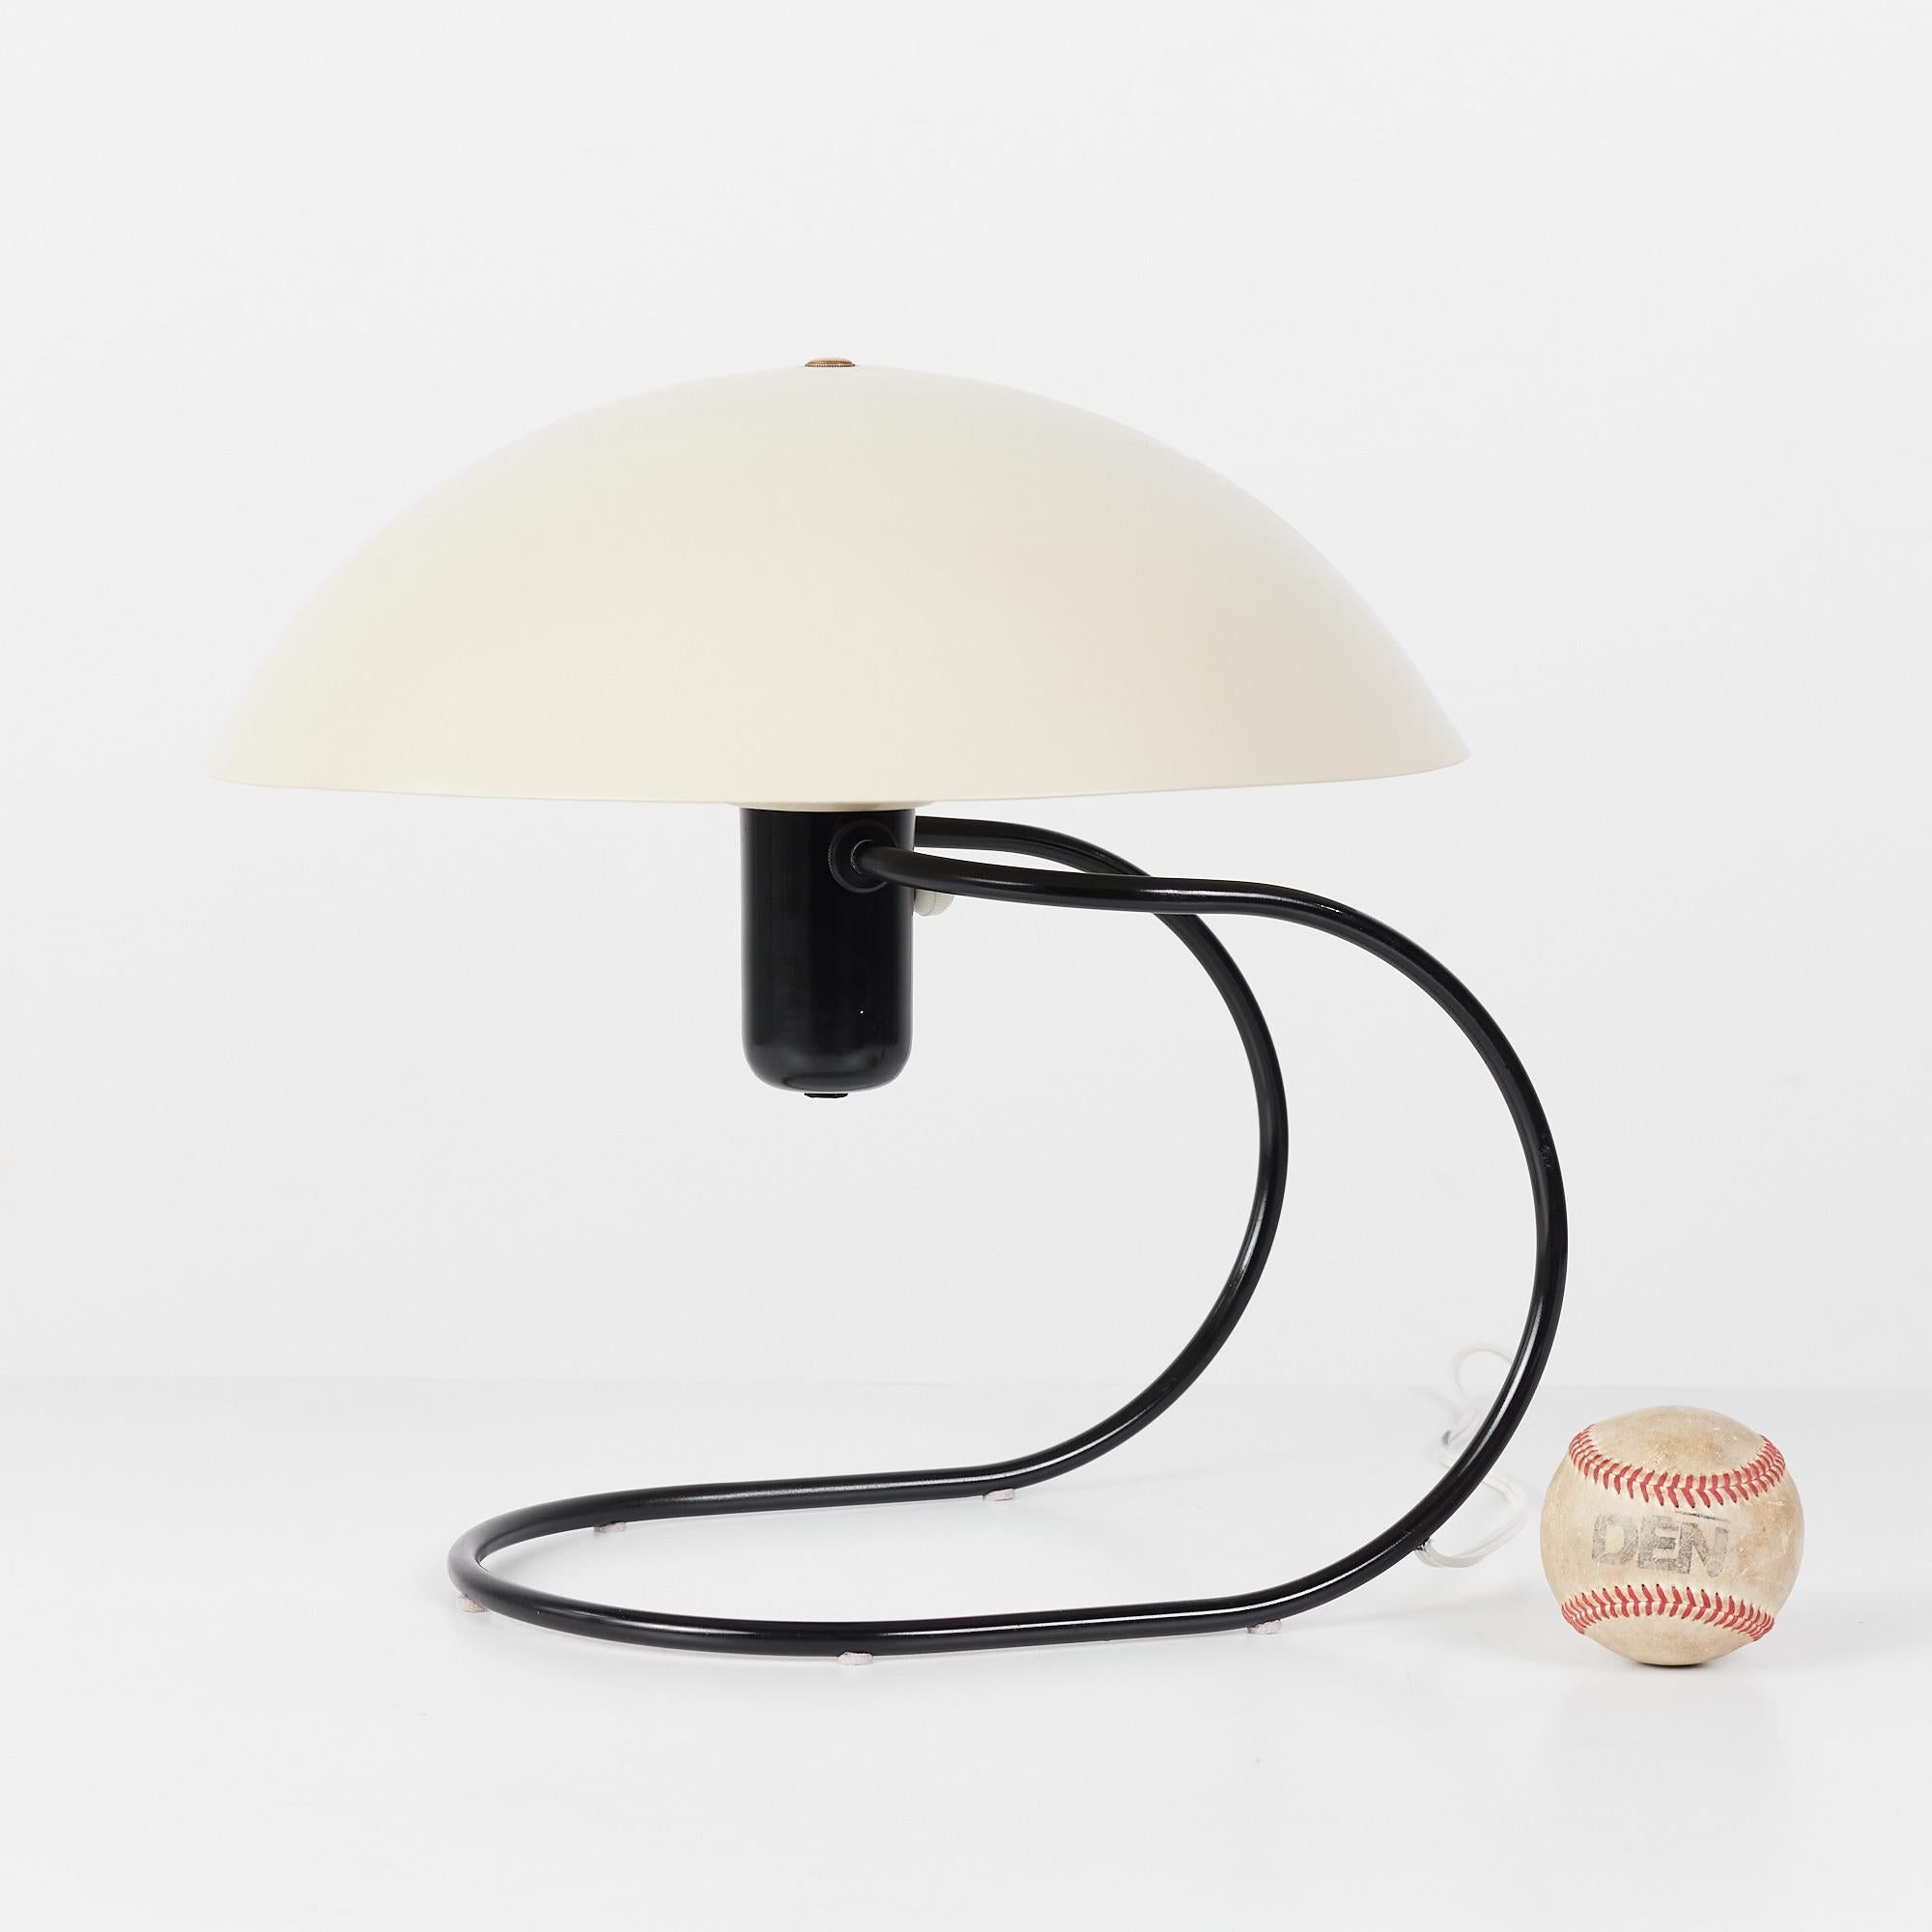 The Anywhere Lamp, designed by Greta von Nessen c.1952, USA, for Nessen Studios. The lamp coined its name by being able to be placed anywhere! It was originally advertised to be used as a table lamp, wall lamp or hanging pendant. It features an